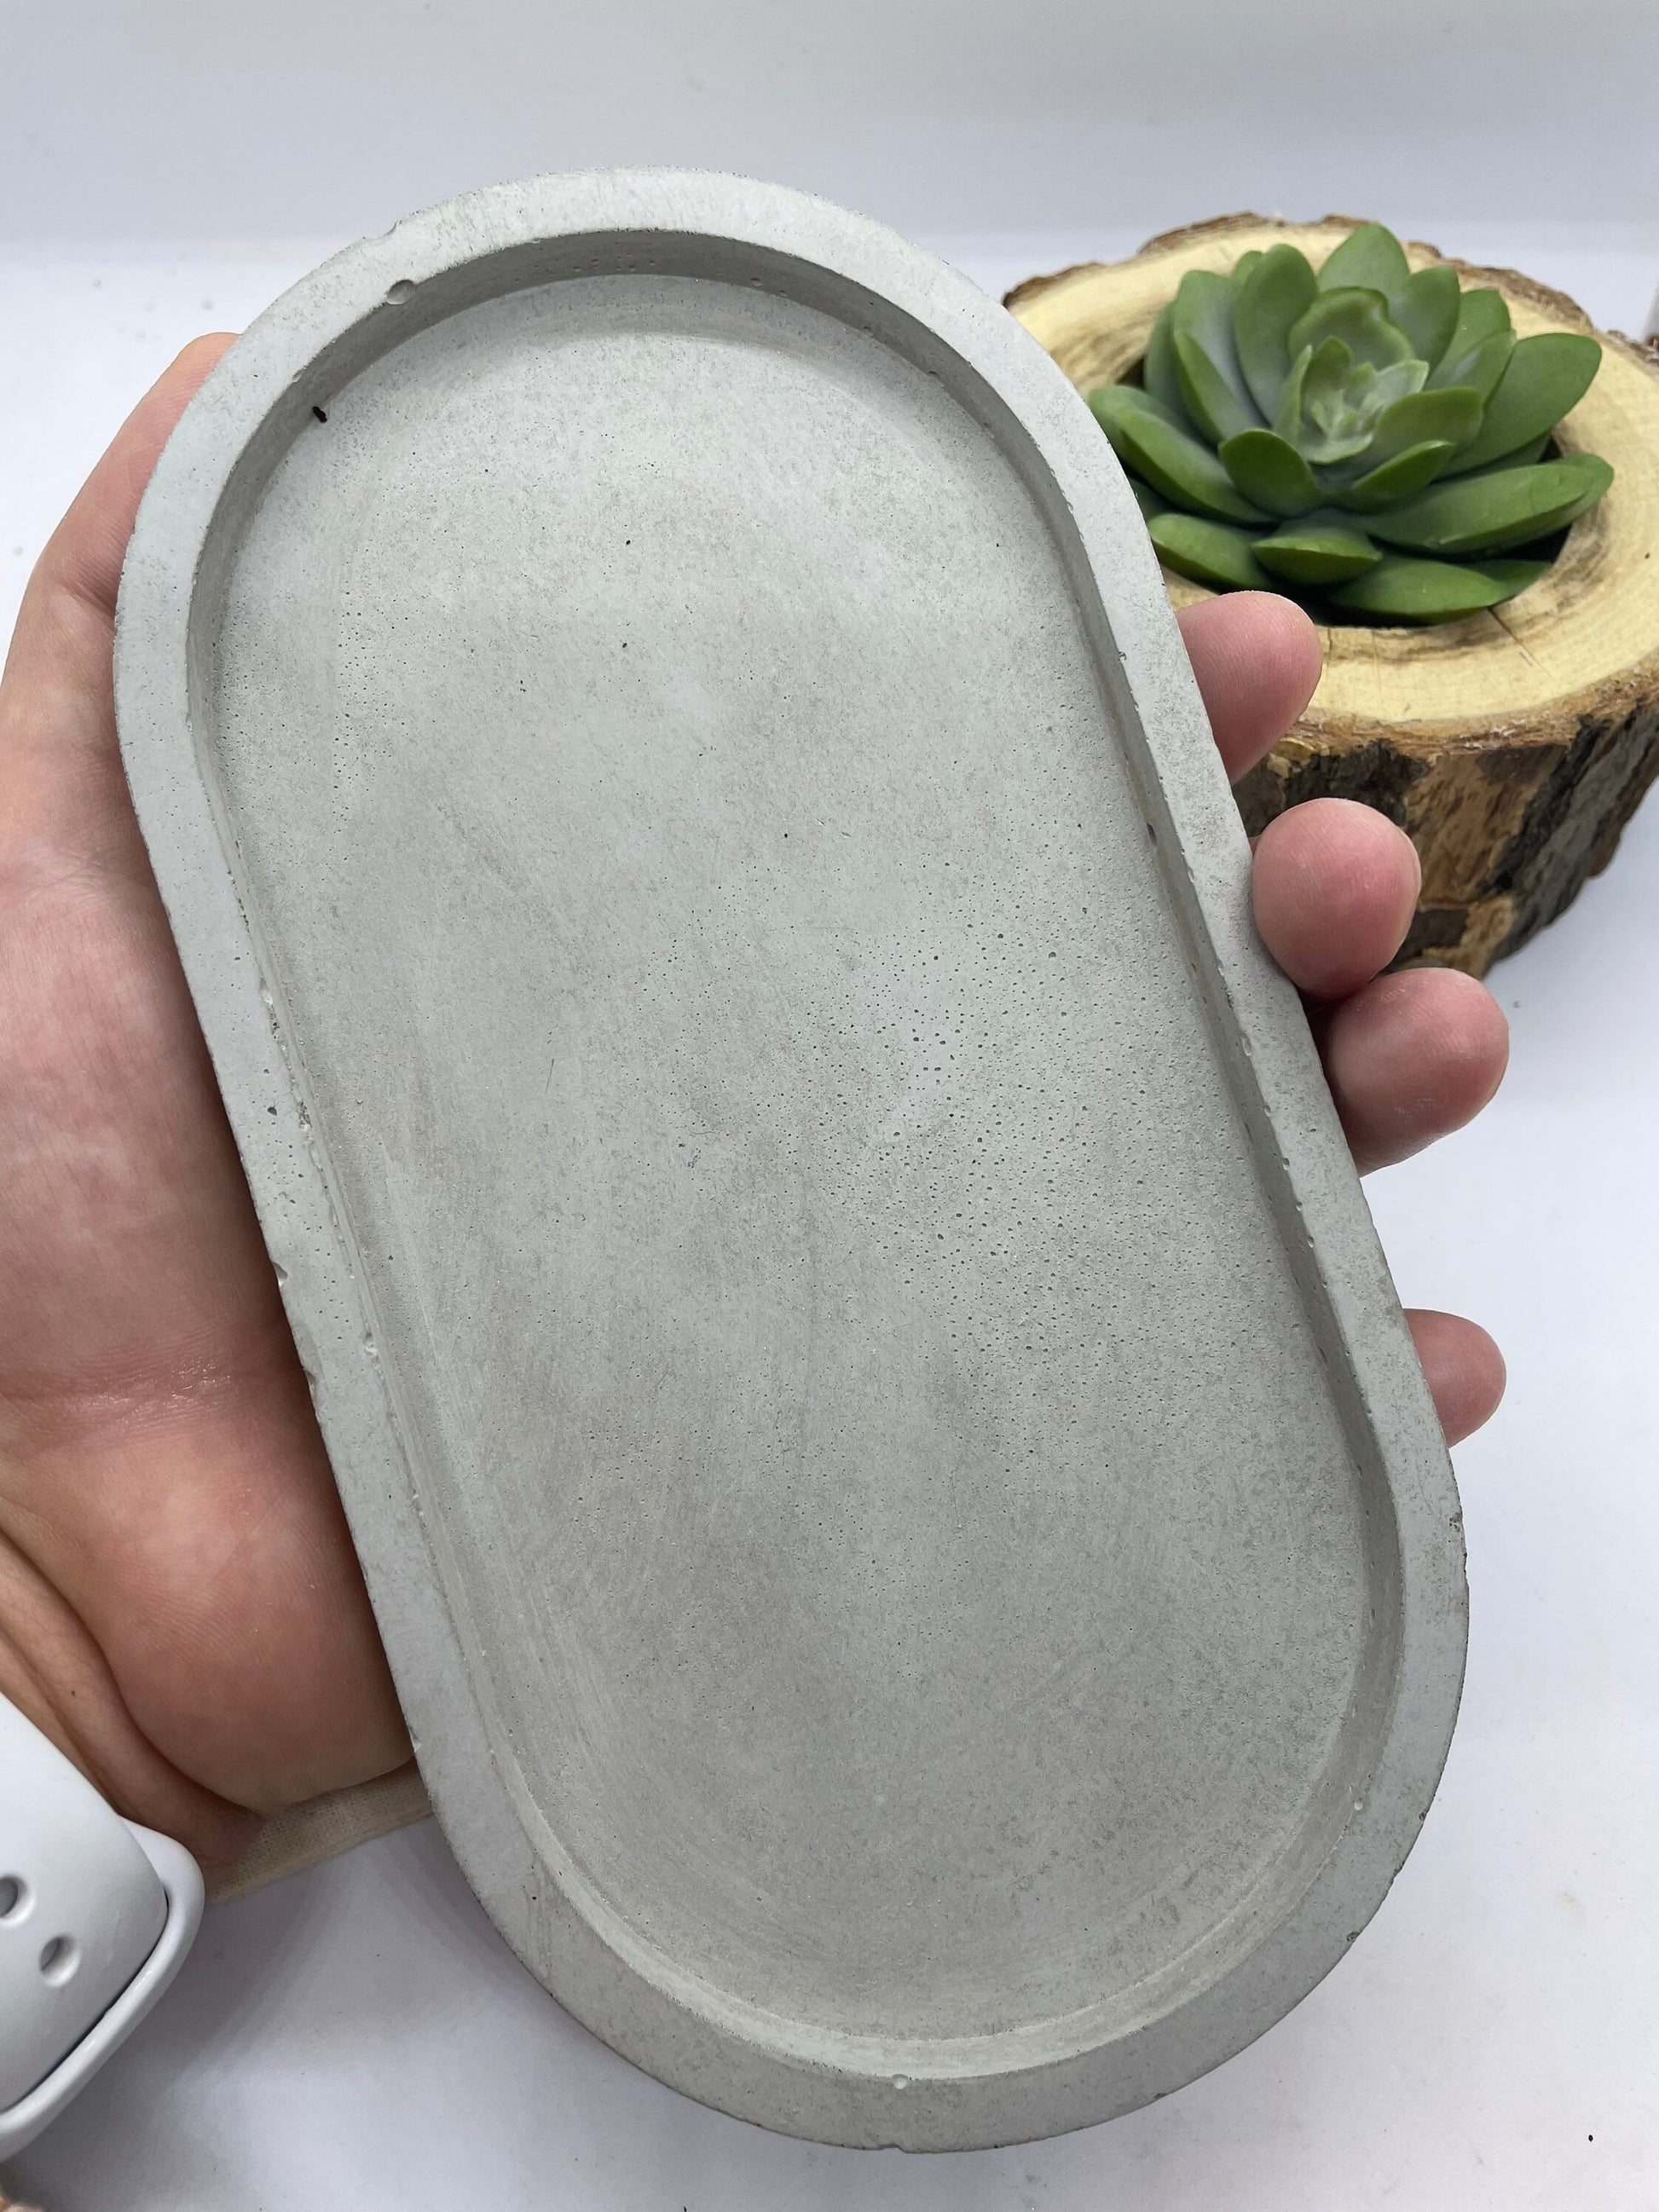 Gem and Mineral Collection, Gifts For Him Unique, Gemstone and Concrete Tray Set, Groomsmen Gift, Men’s Valentine Gift, Anniversary Gift